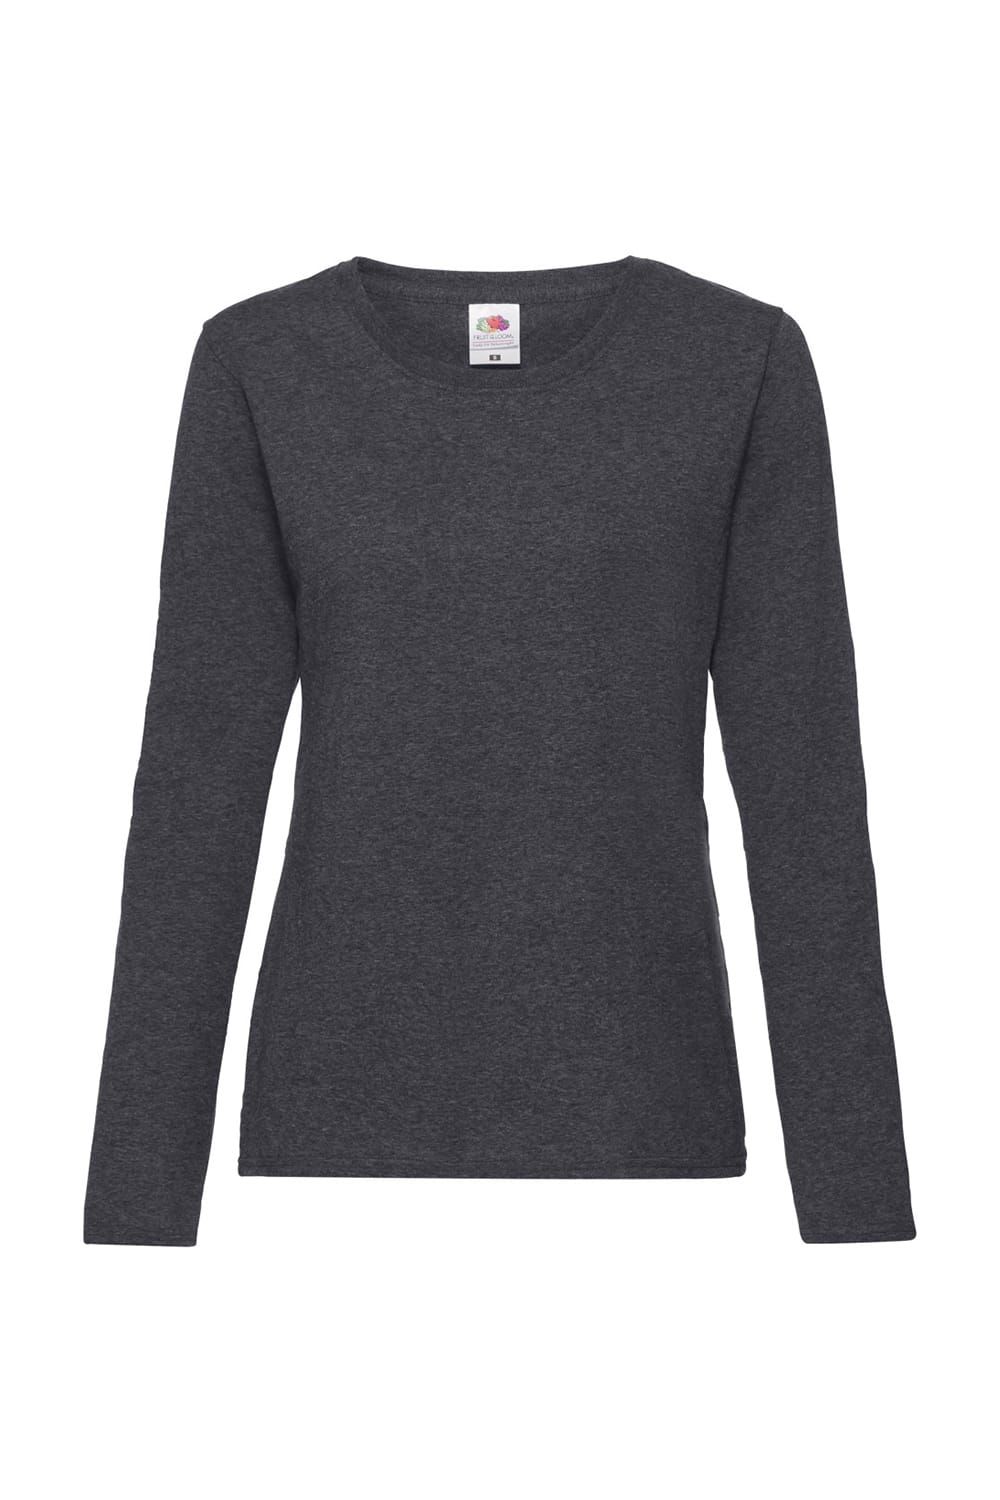 Fruit Of The Loom Ladies Lady-Fit Valueweight Long Sleeve T-Shirt (Dark Heather)